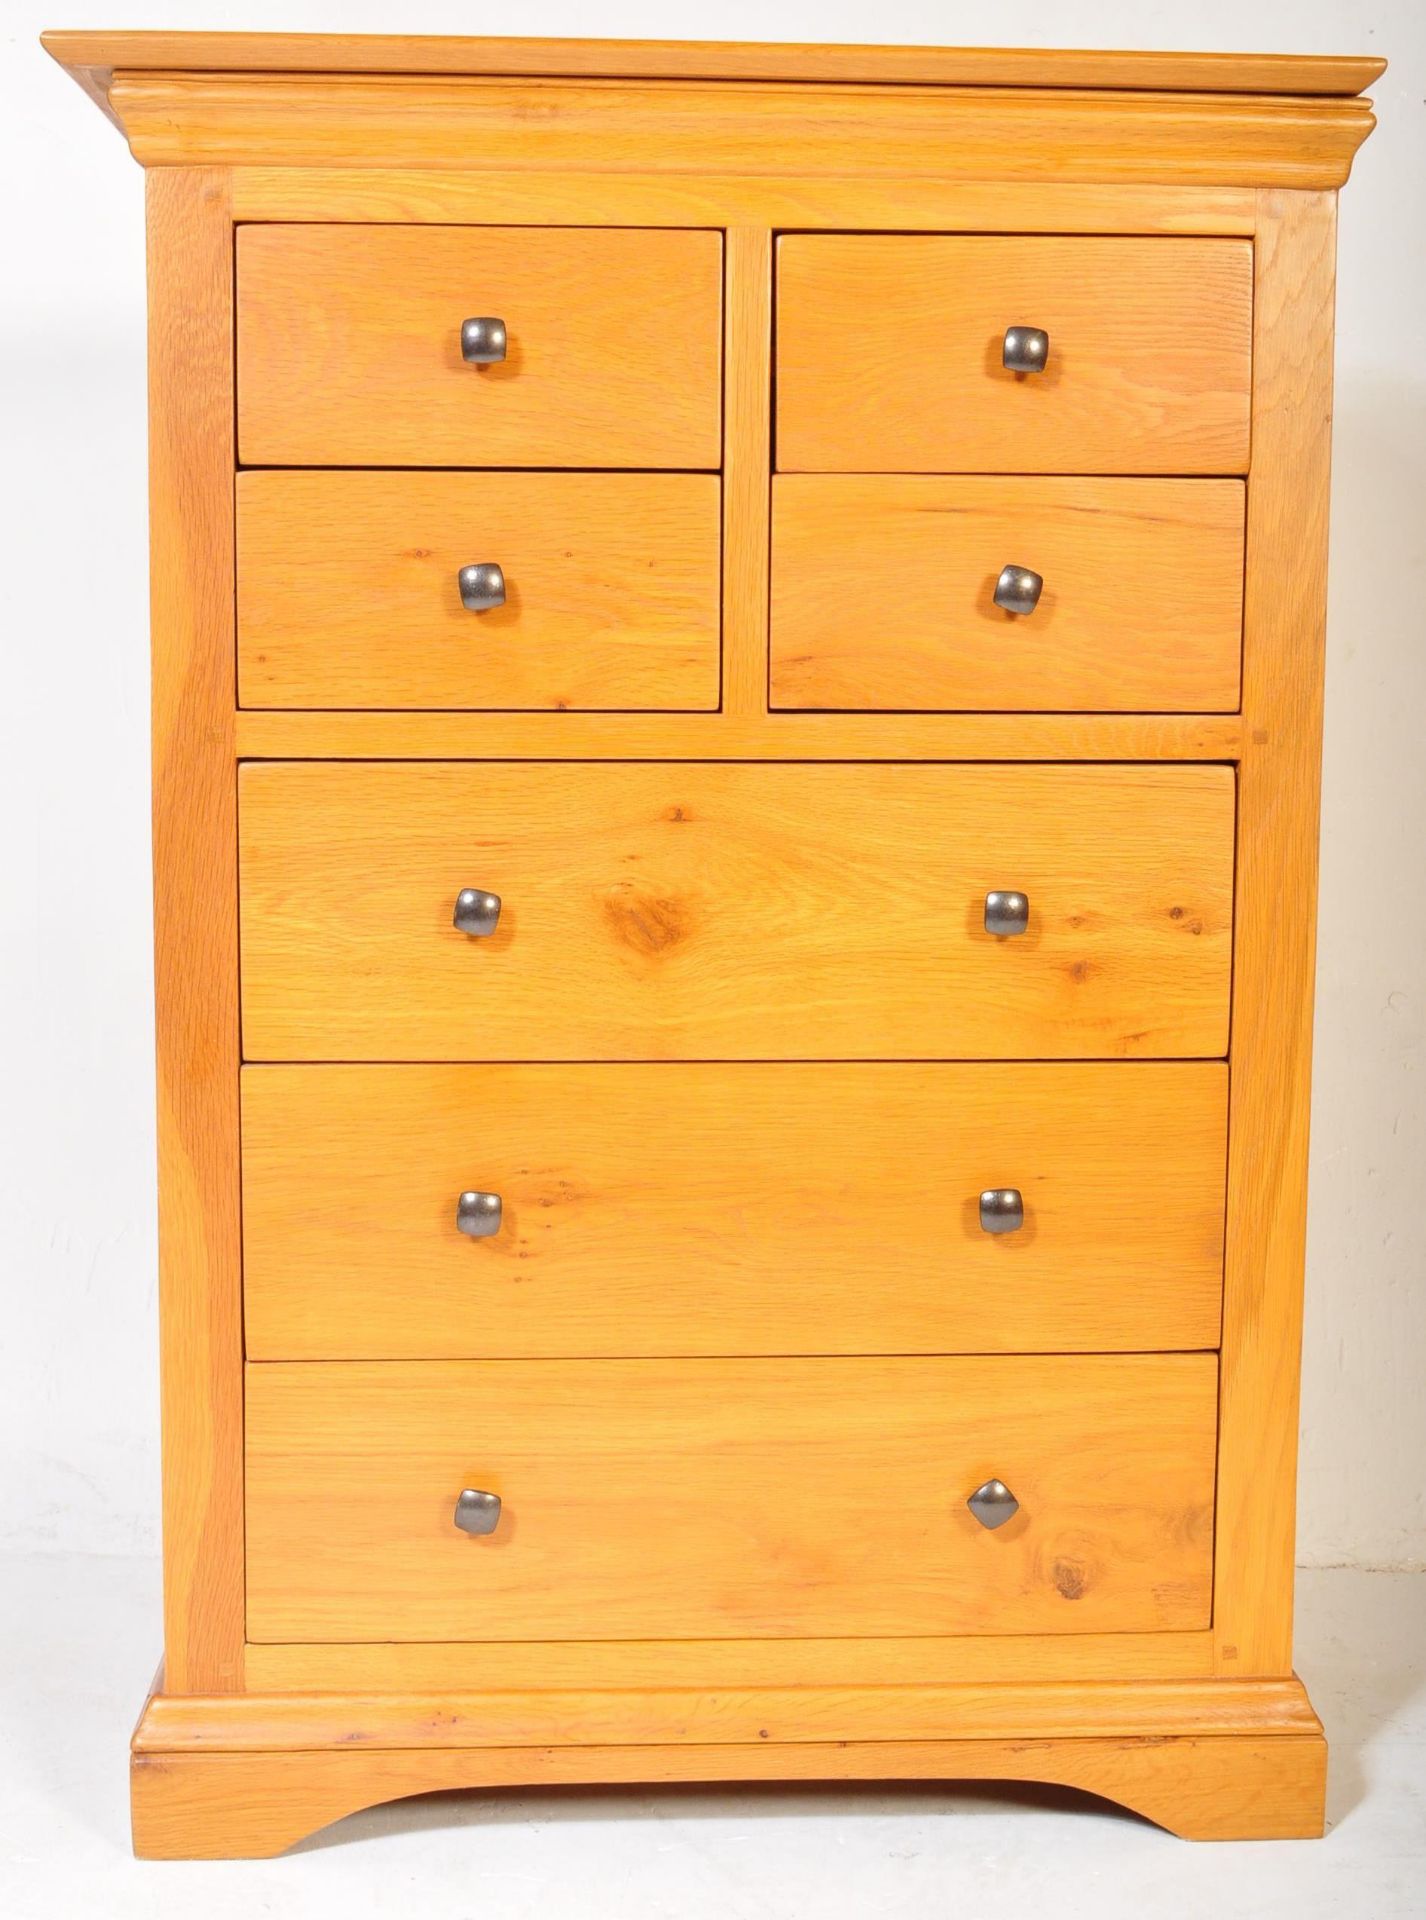 CONTEMPORARY OAK FURNITURE LAND CHEST OF DRAWERS - Image 3 of 5